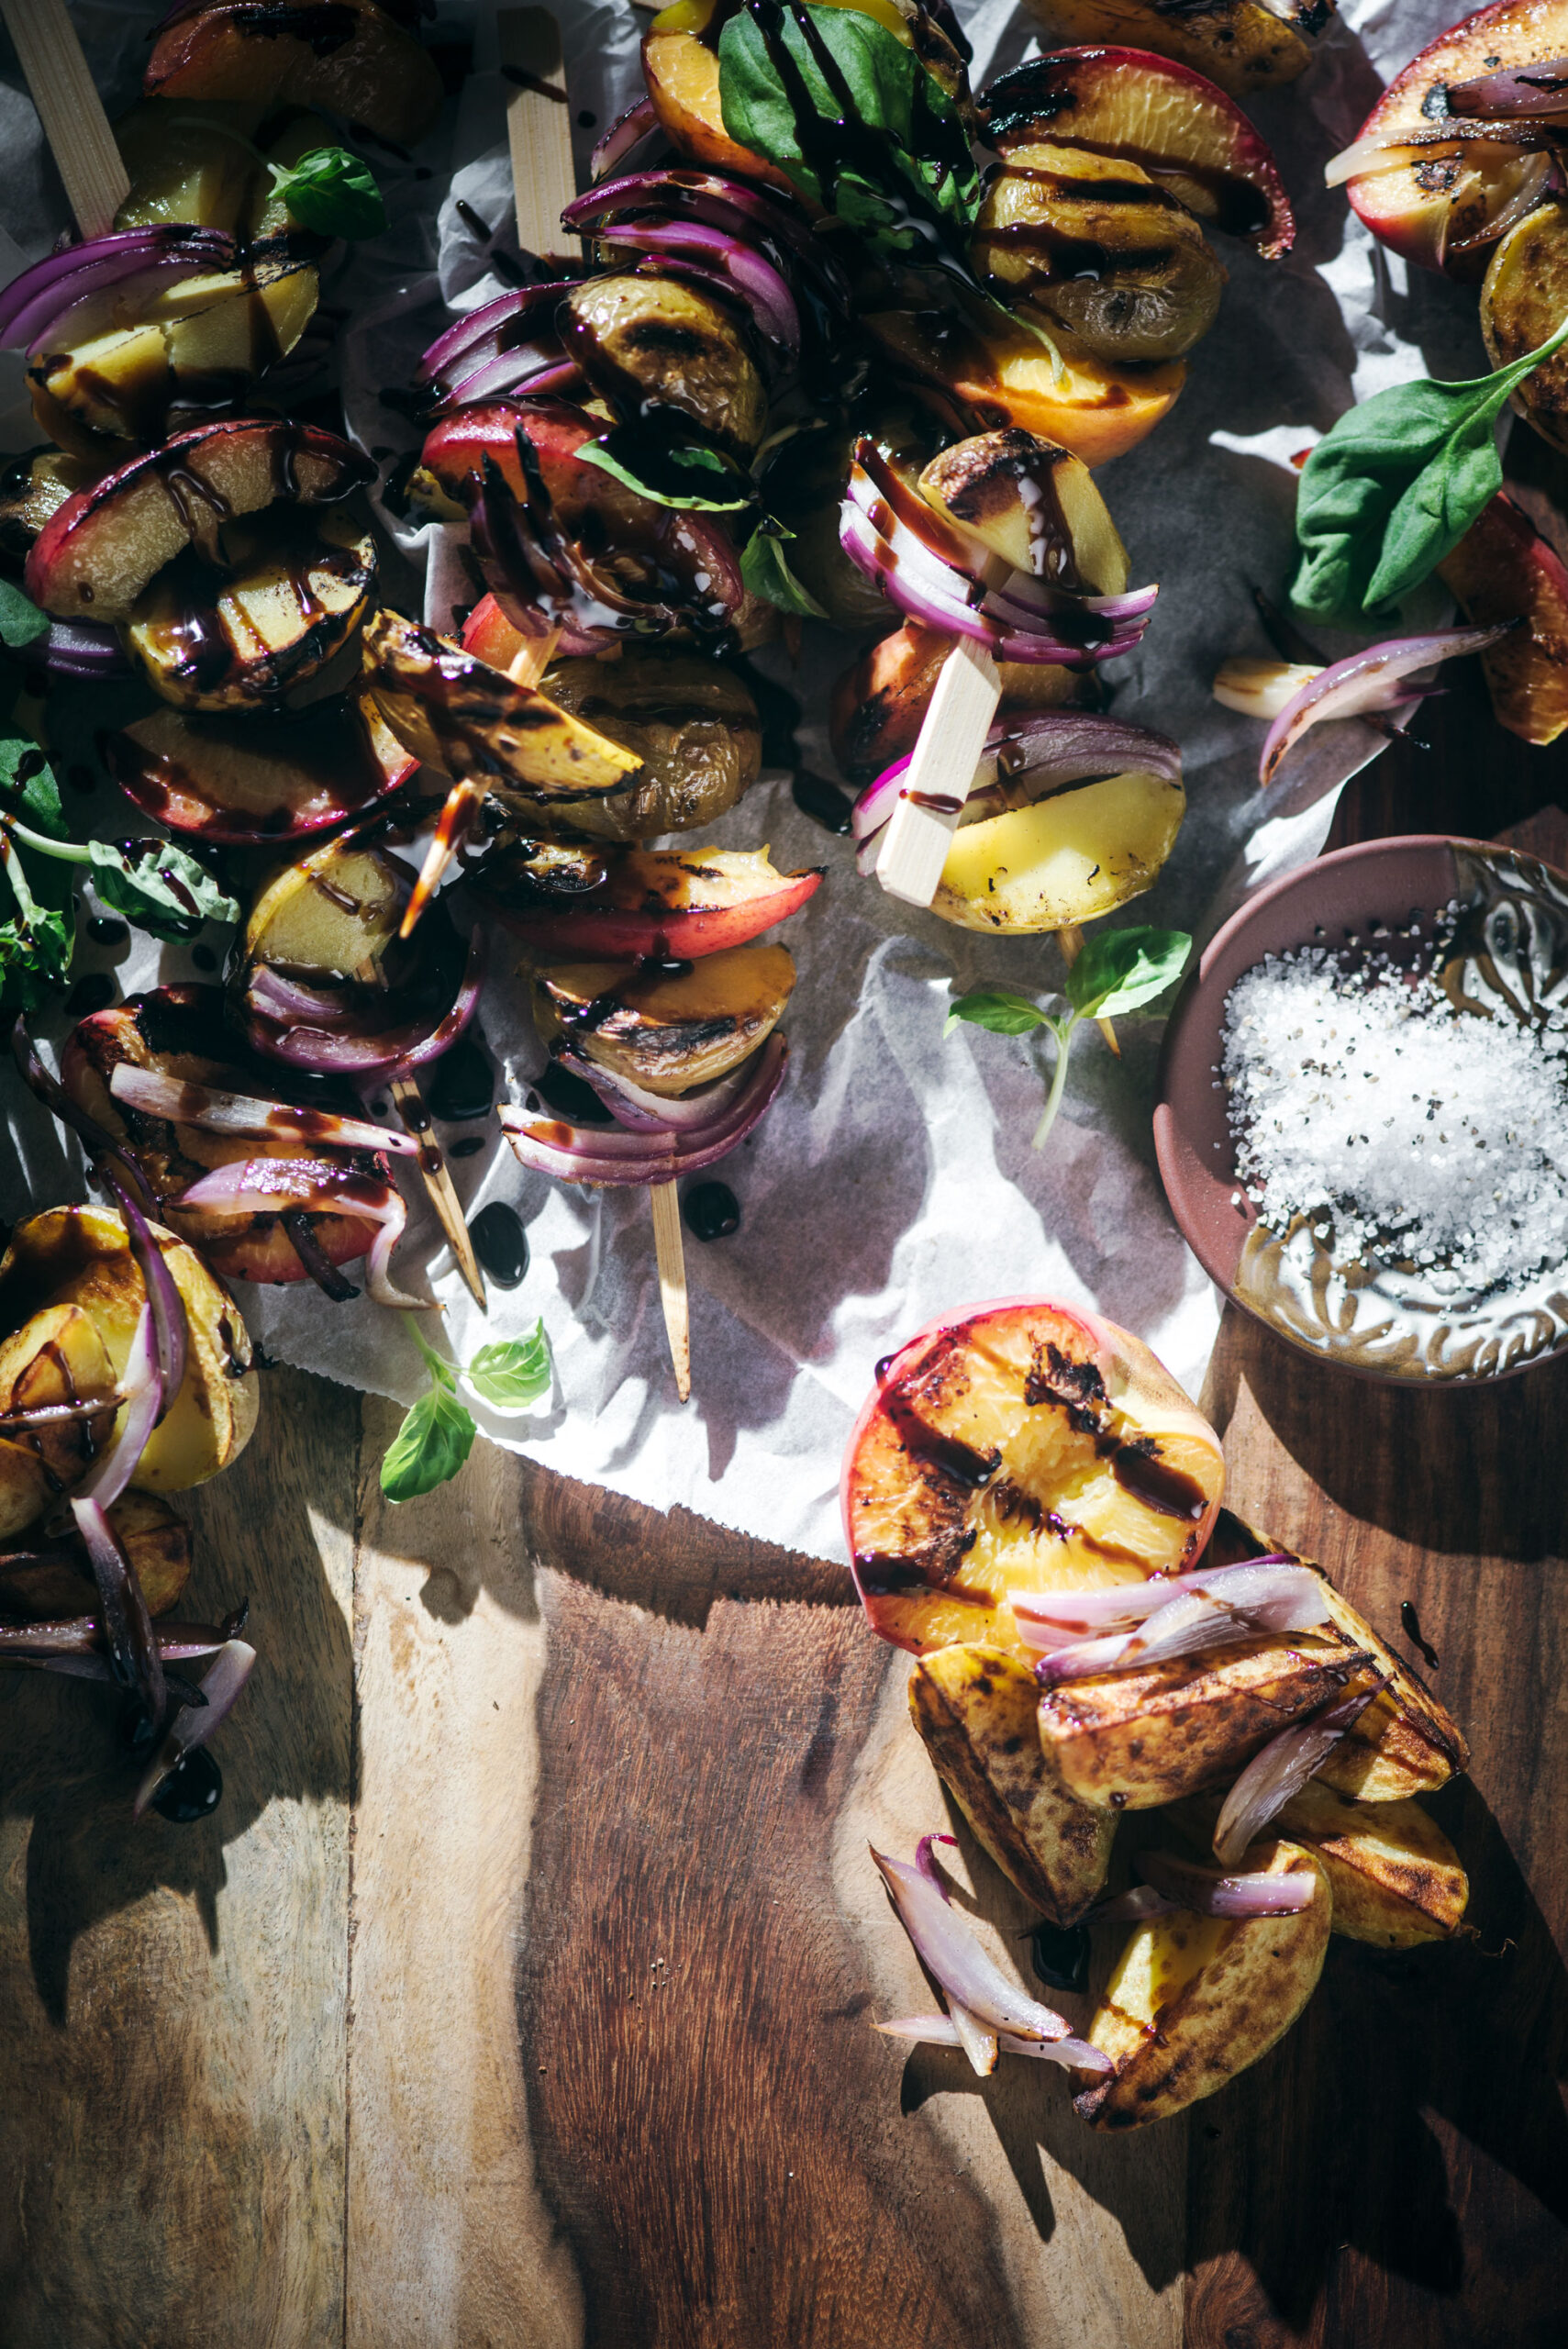 Grilled potato kabobs on wooden board - served on skewers or as salad